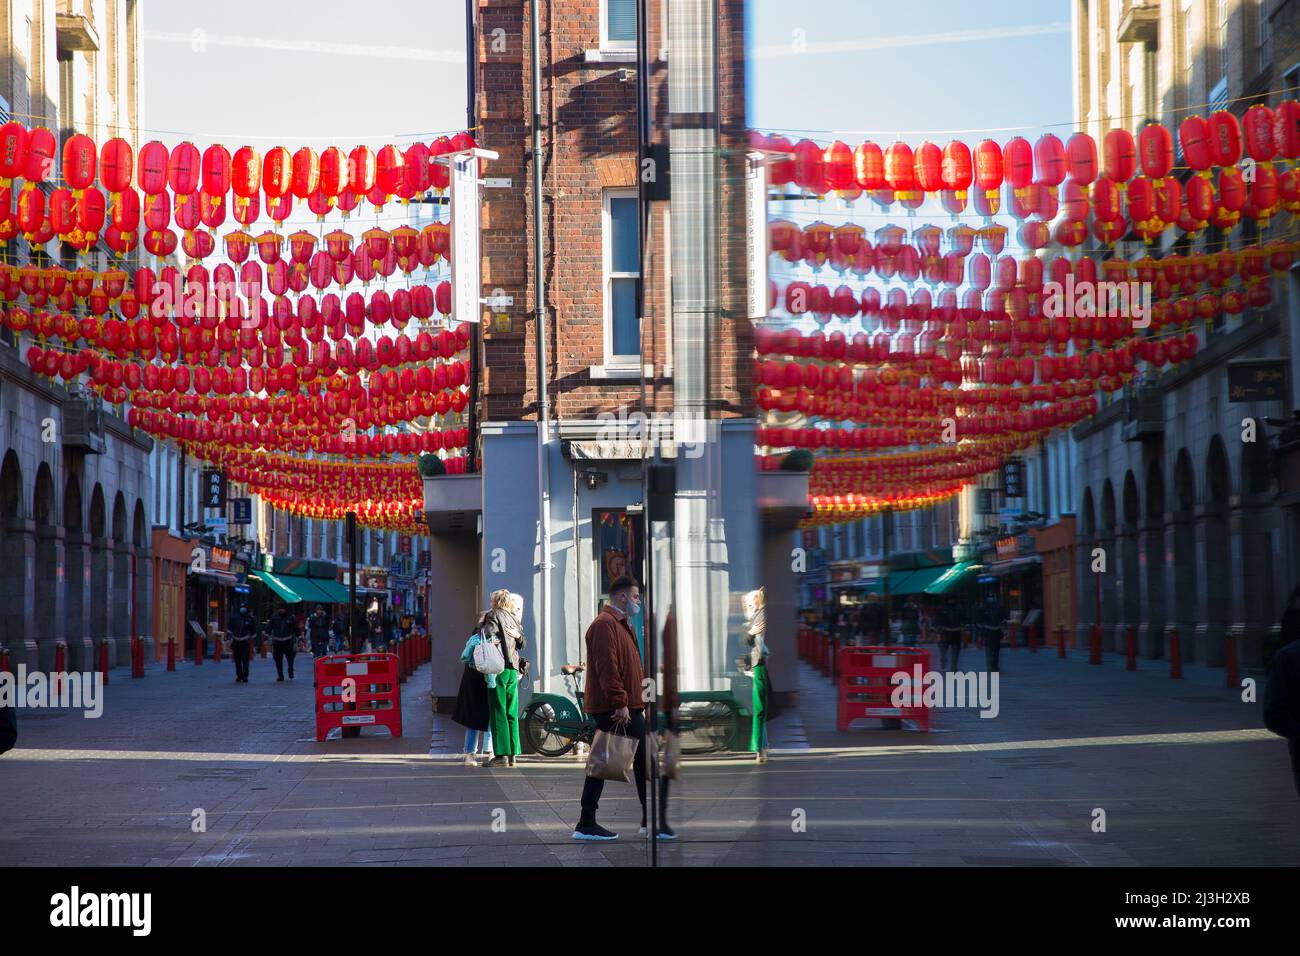 People stroll in Chinatown, central London as the Lunar New Year falls on 1 February this year. Stock Photo